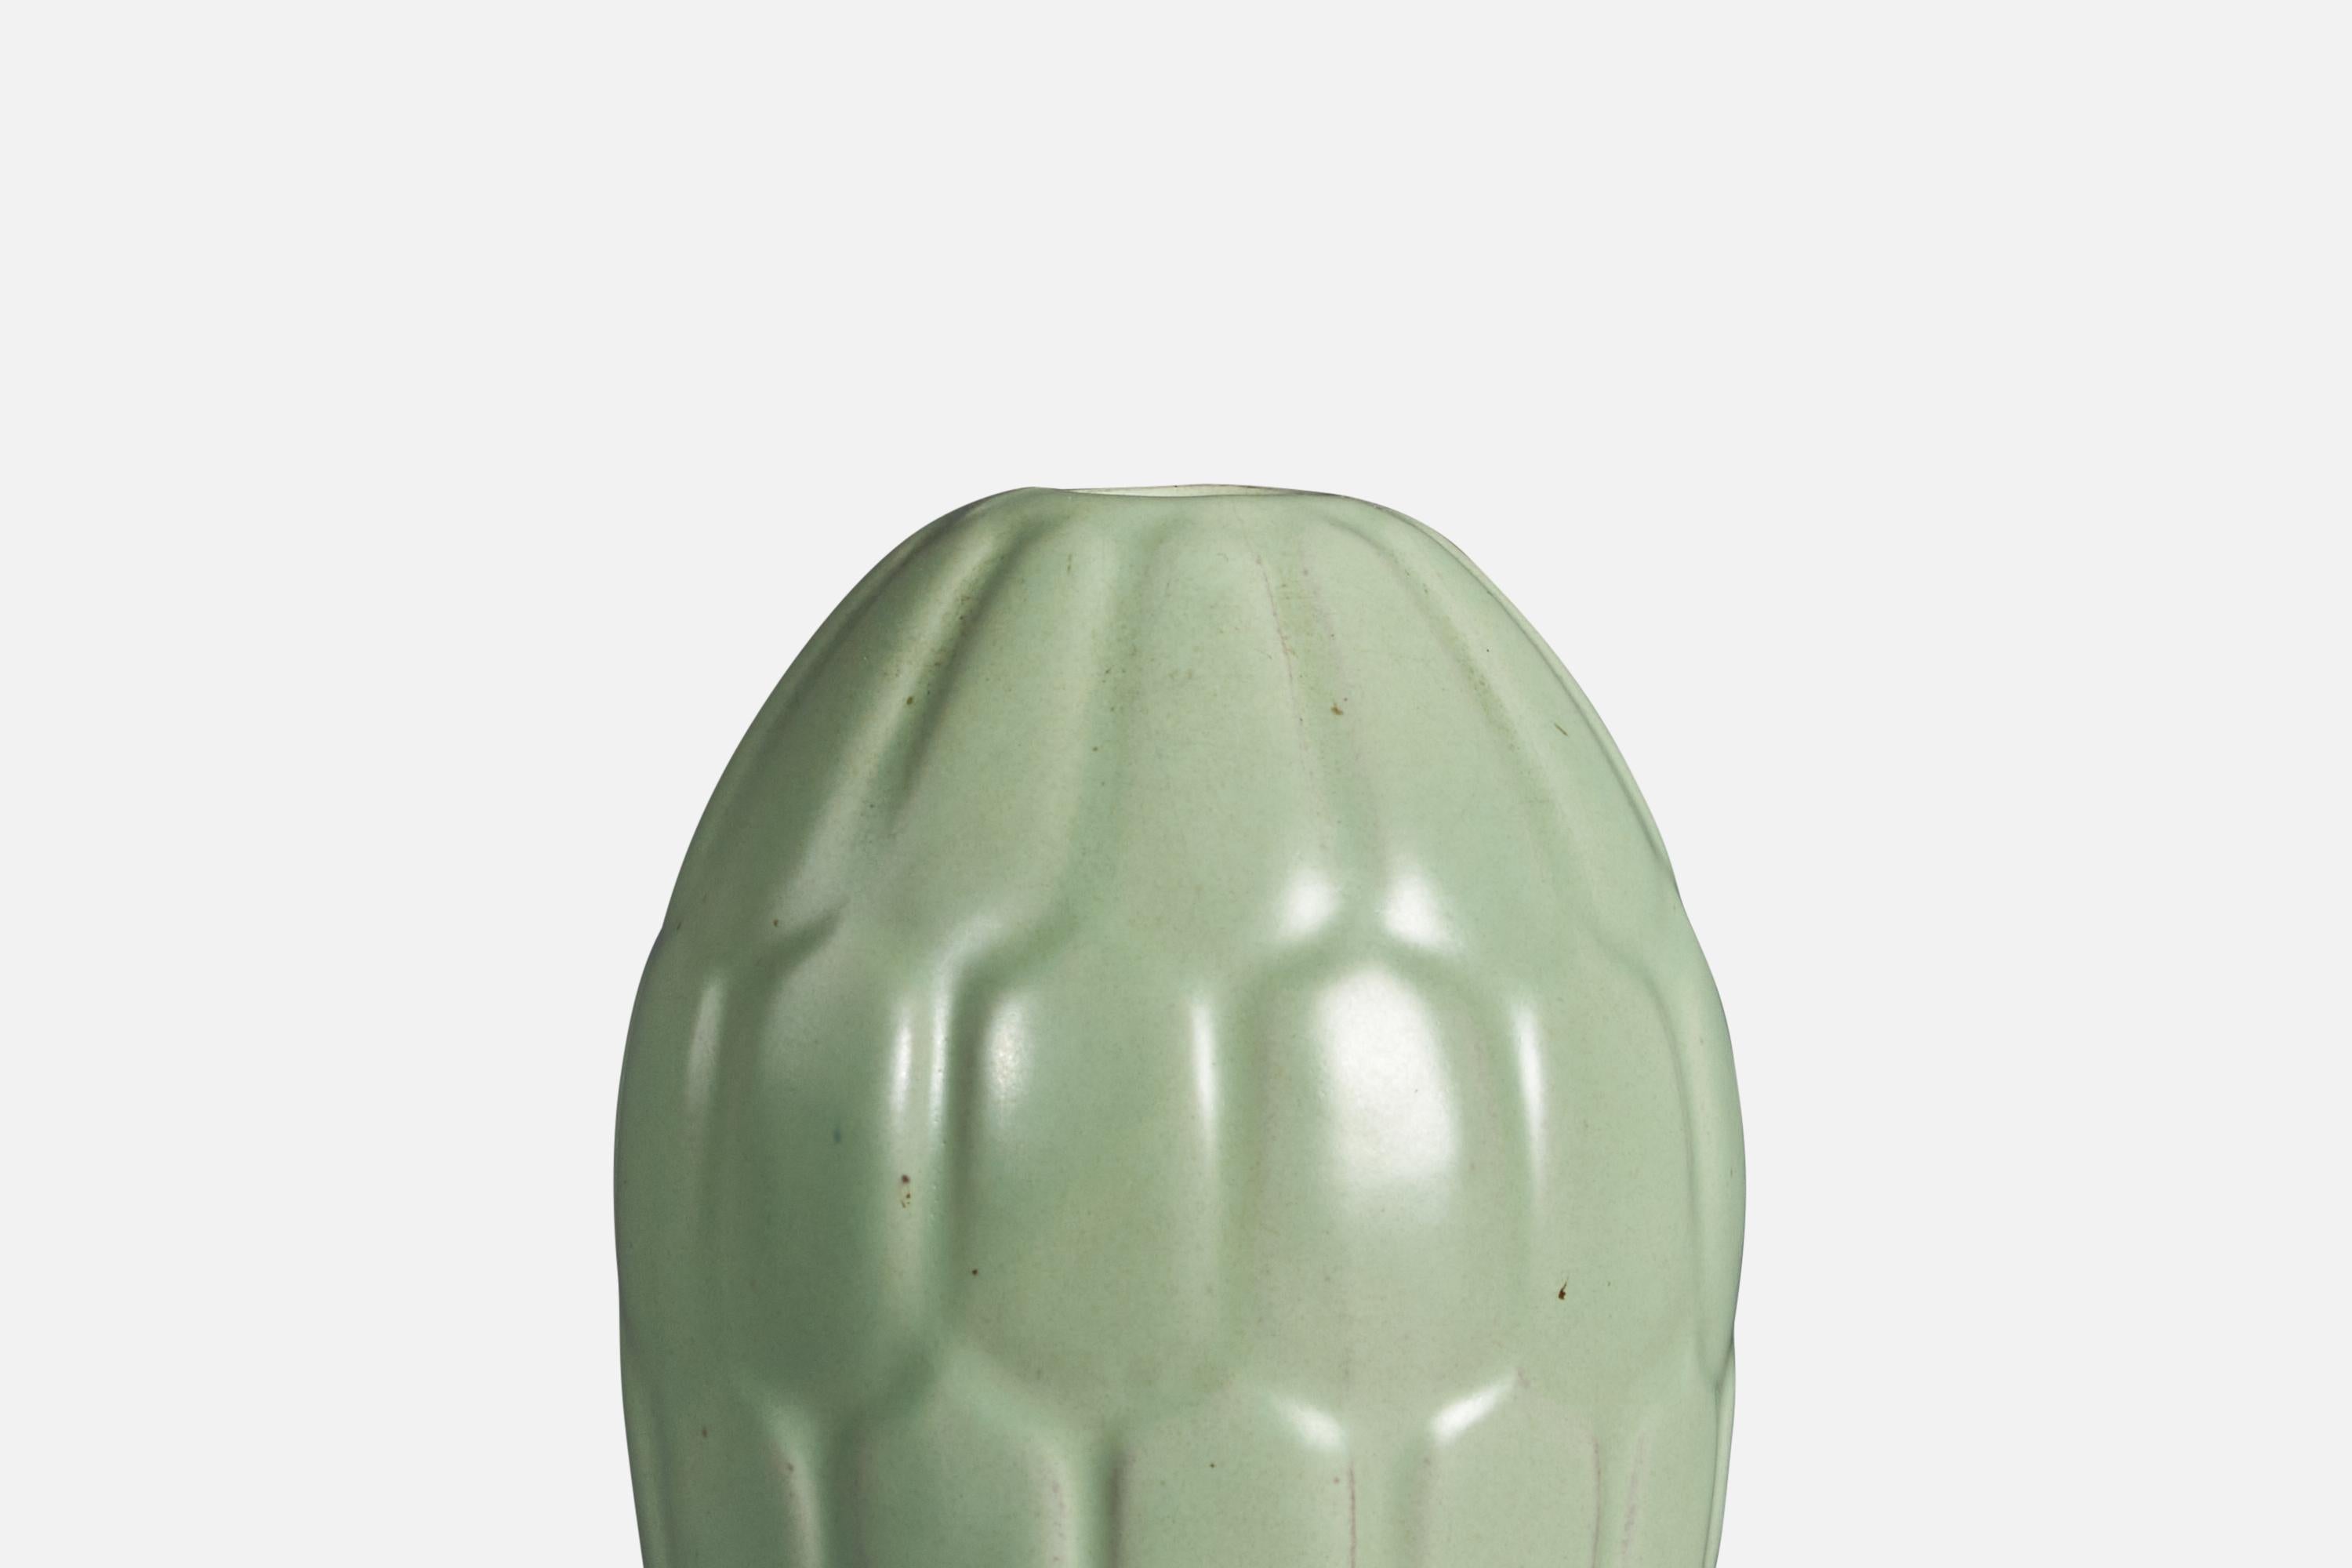 A green-glazed earthenware vase designed by Anna-Lisa Thompson, and produced by Upsala Ekeby, Sweden, 1930s.